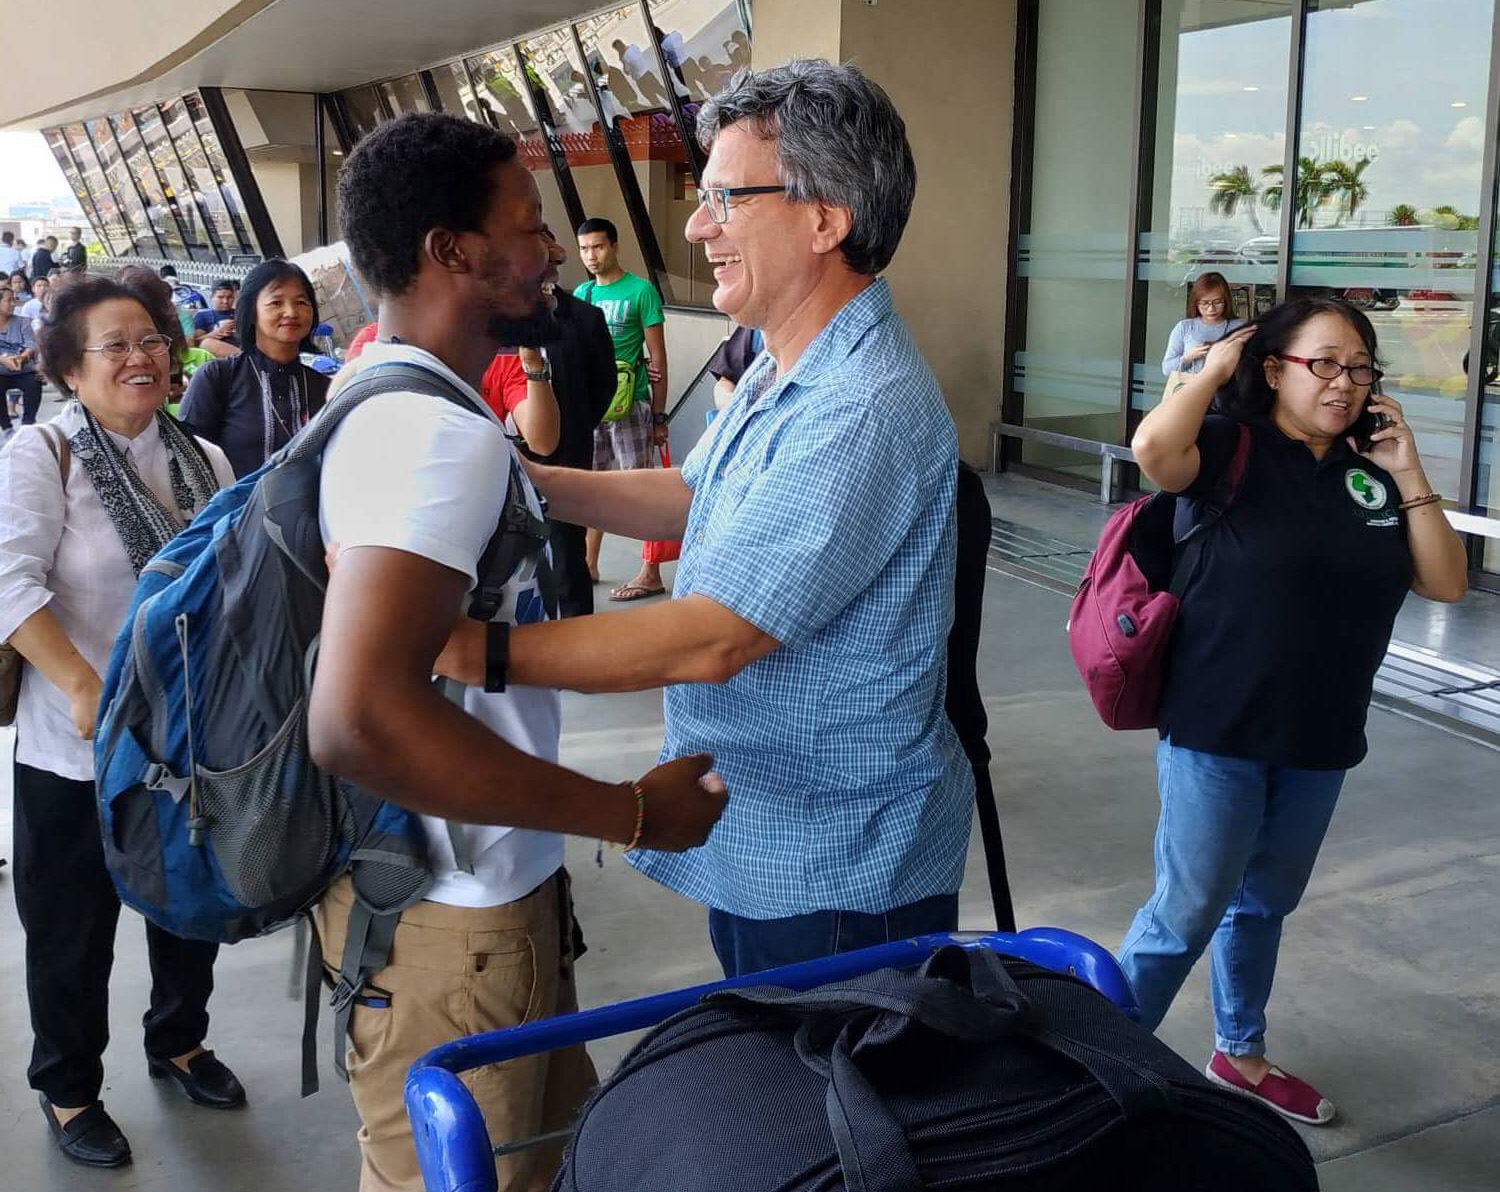 United Methodist missionary Tawanda Chandiwana (left foreground) is embraced by Thomas Kemper, head of the Board of Global Ministries, at the Ninoy Aquino International Airport in Manila, Philippines, after Chandiwana was released from a detention center and allowed to leave the country. 2018 file photo courtesy of Thomas Kemper, Global Ministries.